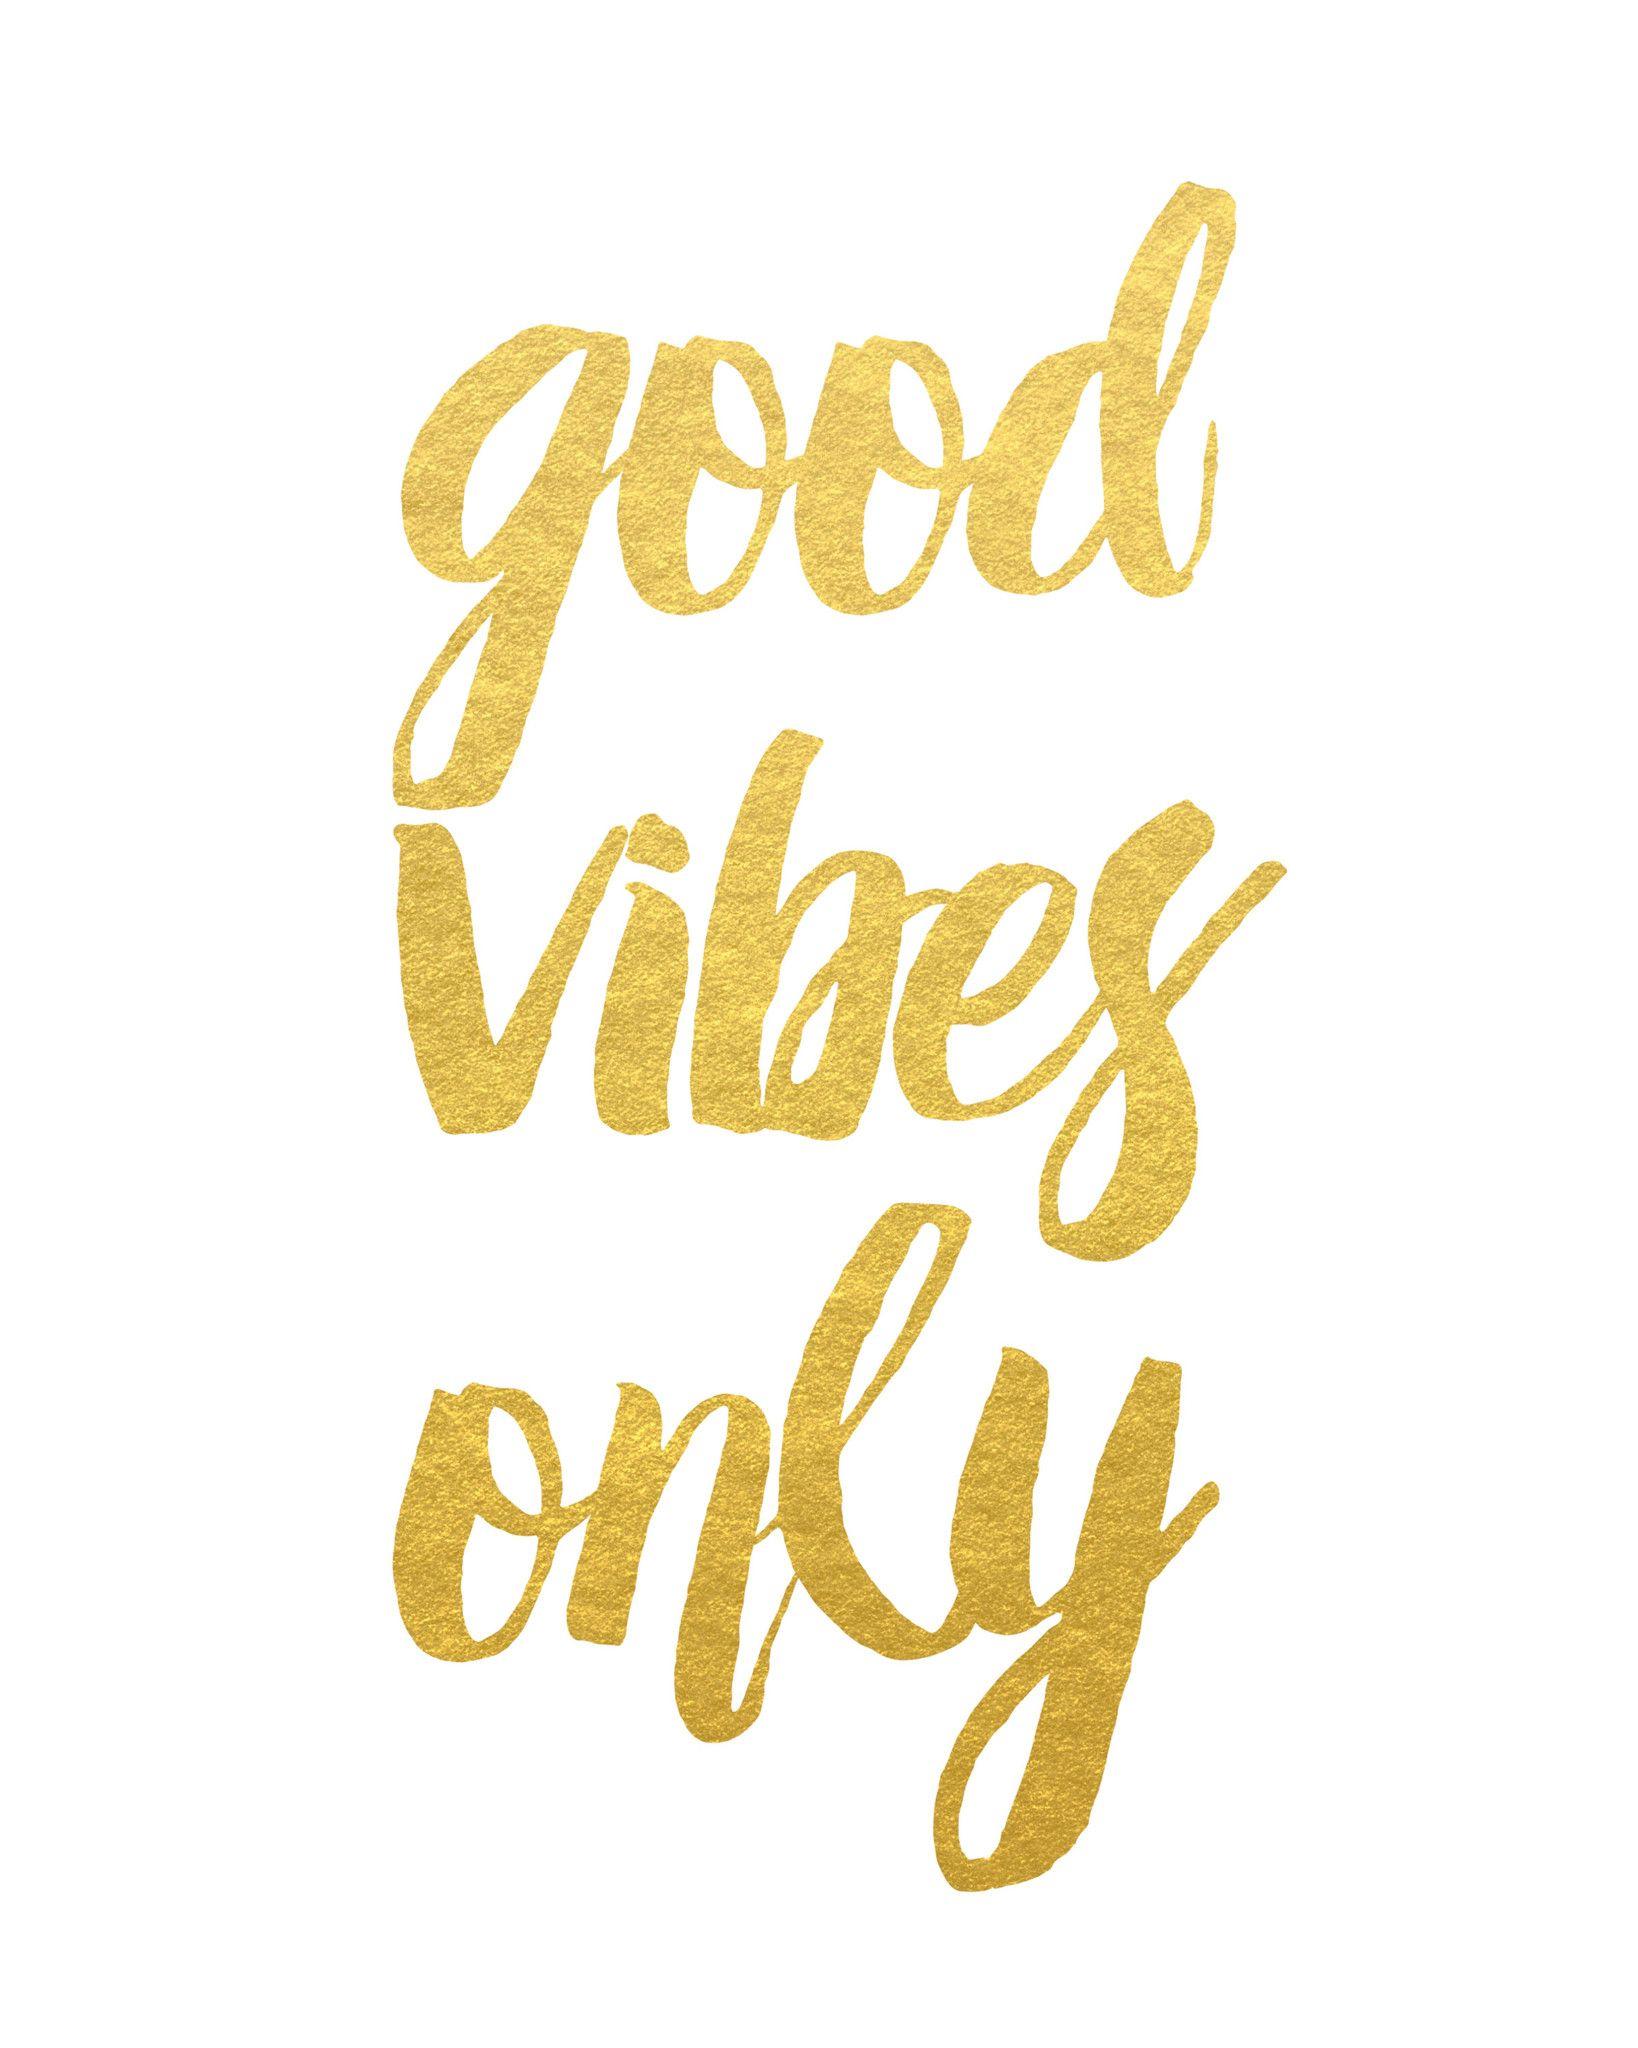 Good Vibes Only Print. White satin, Good vibes only and Gold